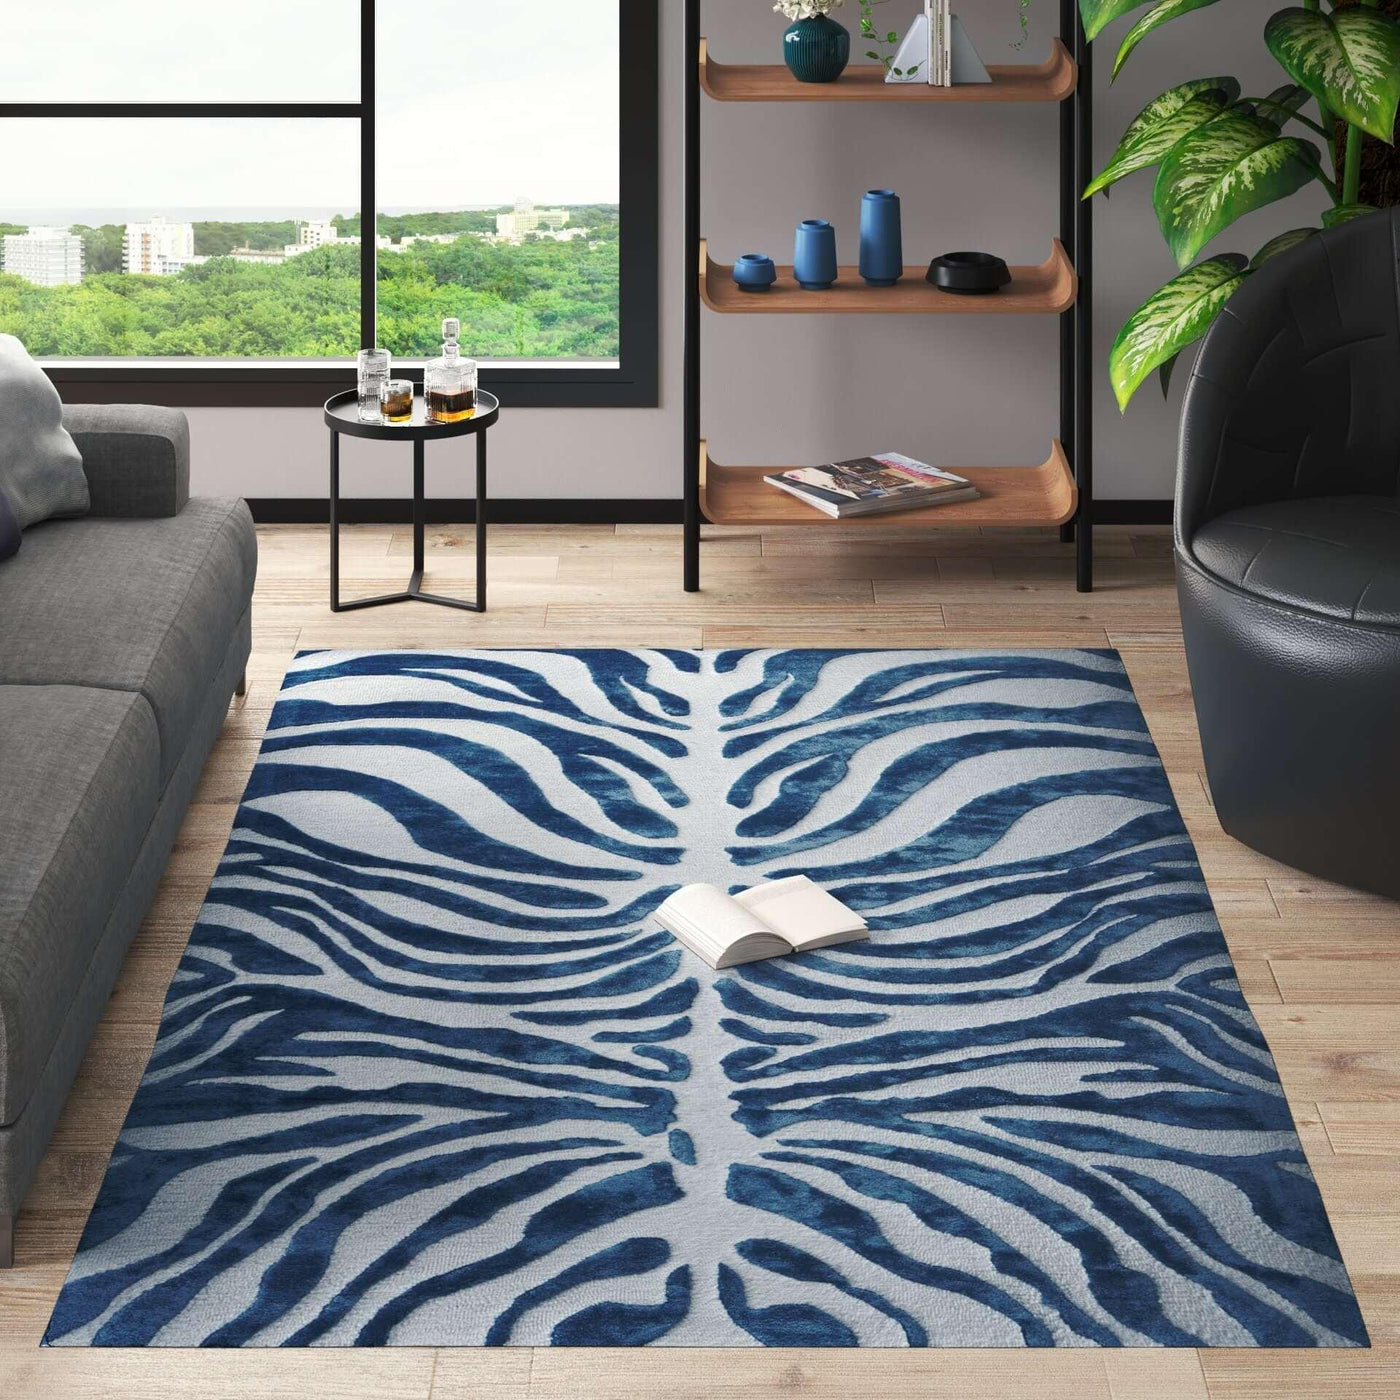 Bamboo Silk Rug, New Apartment Gift, Floorcloth, TIGER Printed Rug, Minimalist Blue And White Panther Style Transitional WOOL RUG 5X8 ft